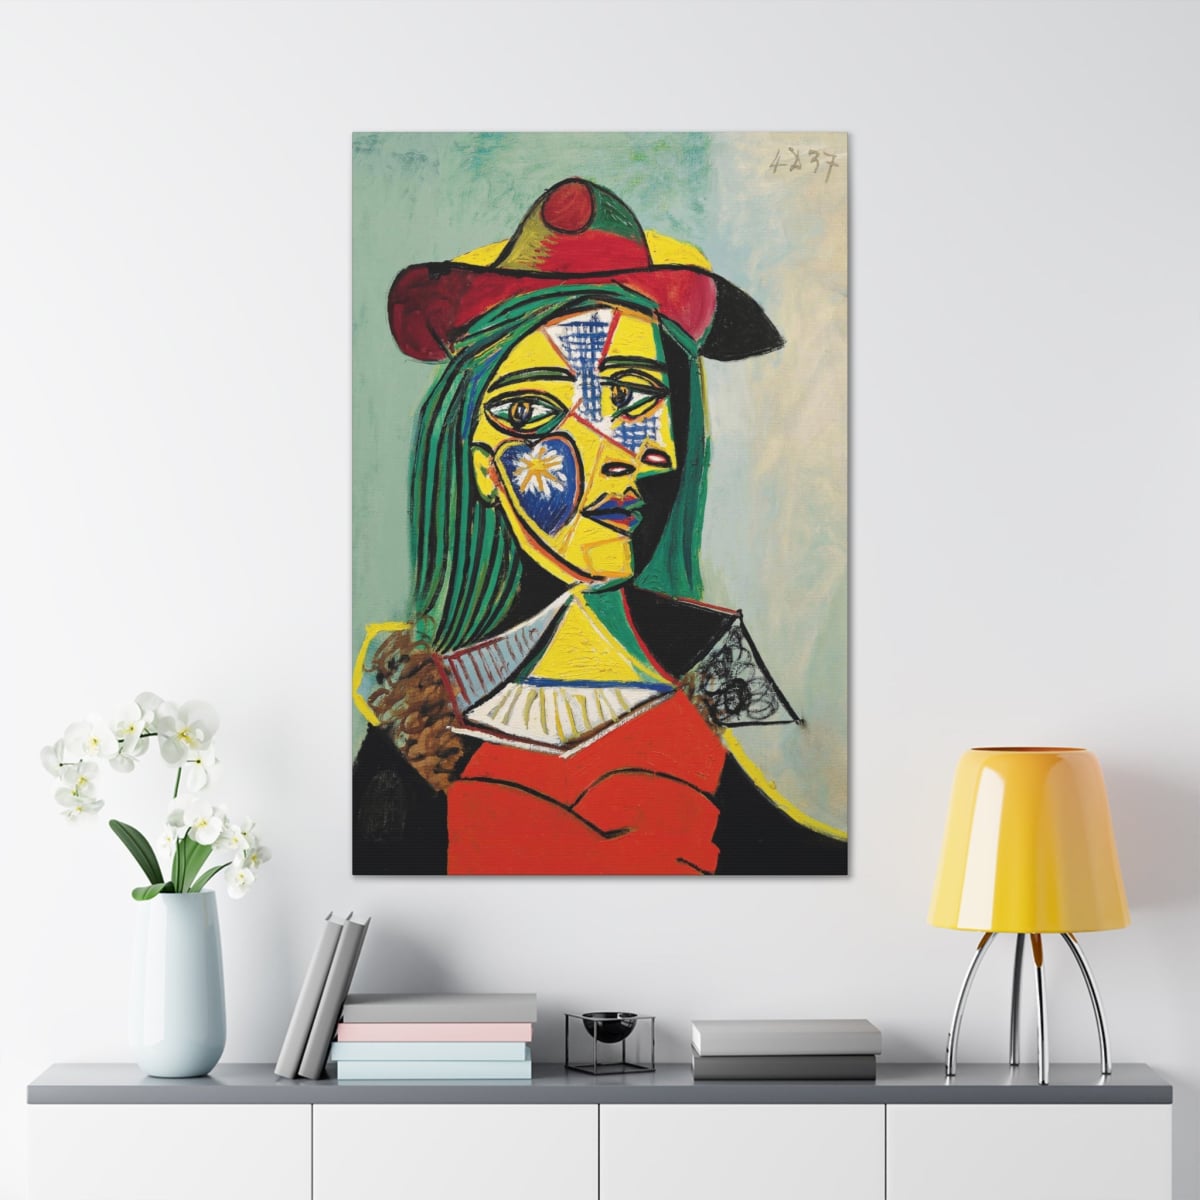 The Woman in Hat and Fur Collar - A Pablo Picasso Masterpiece